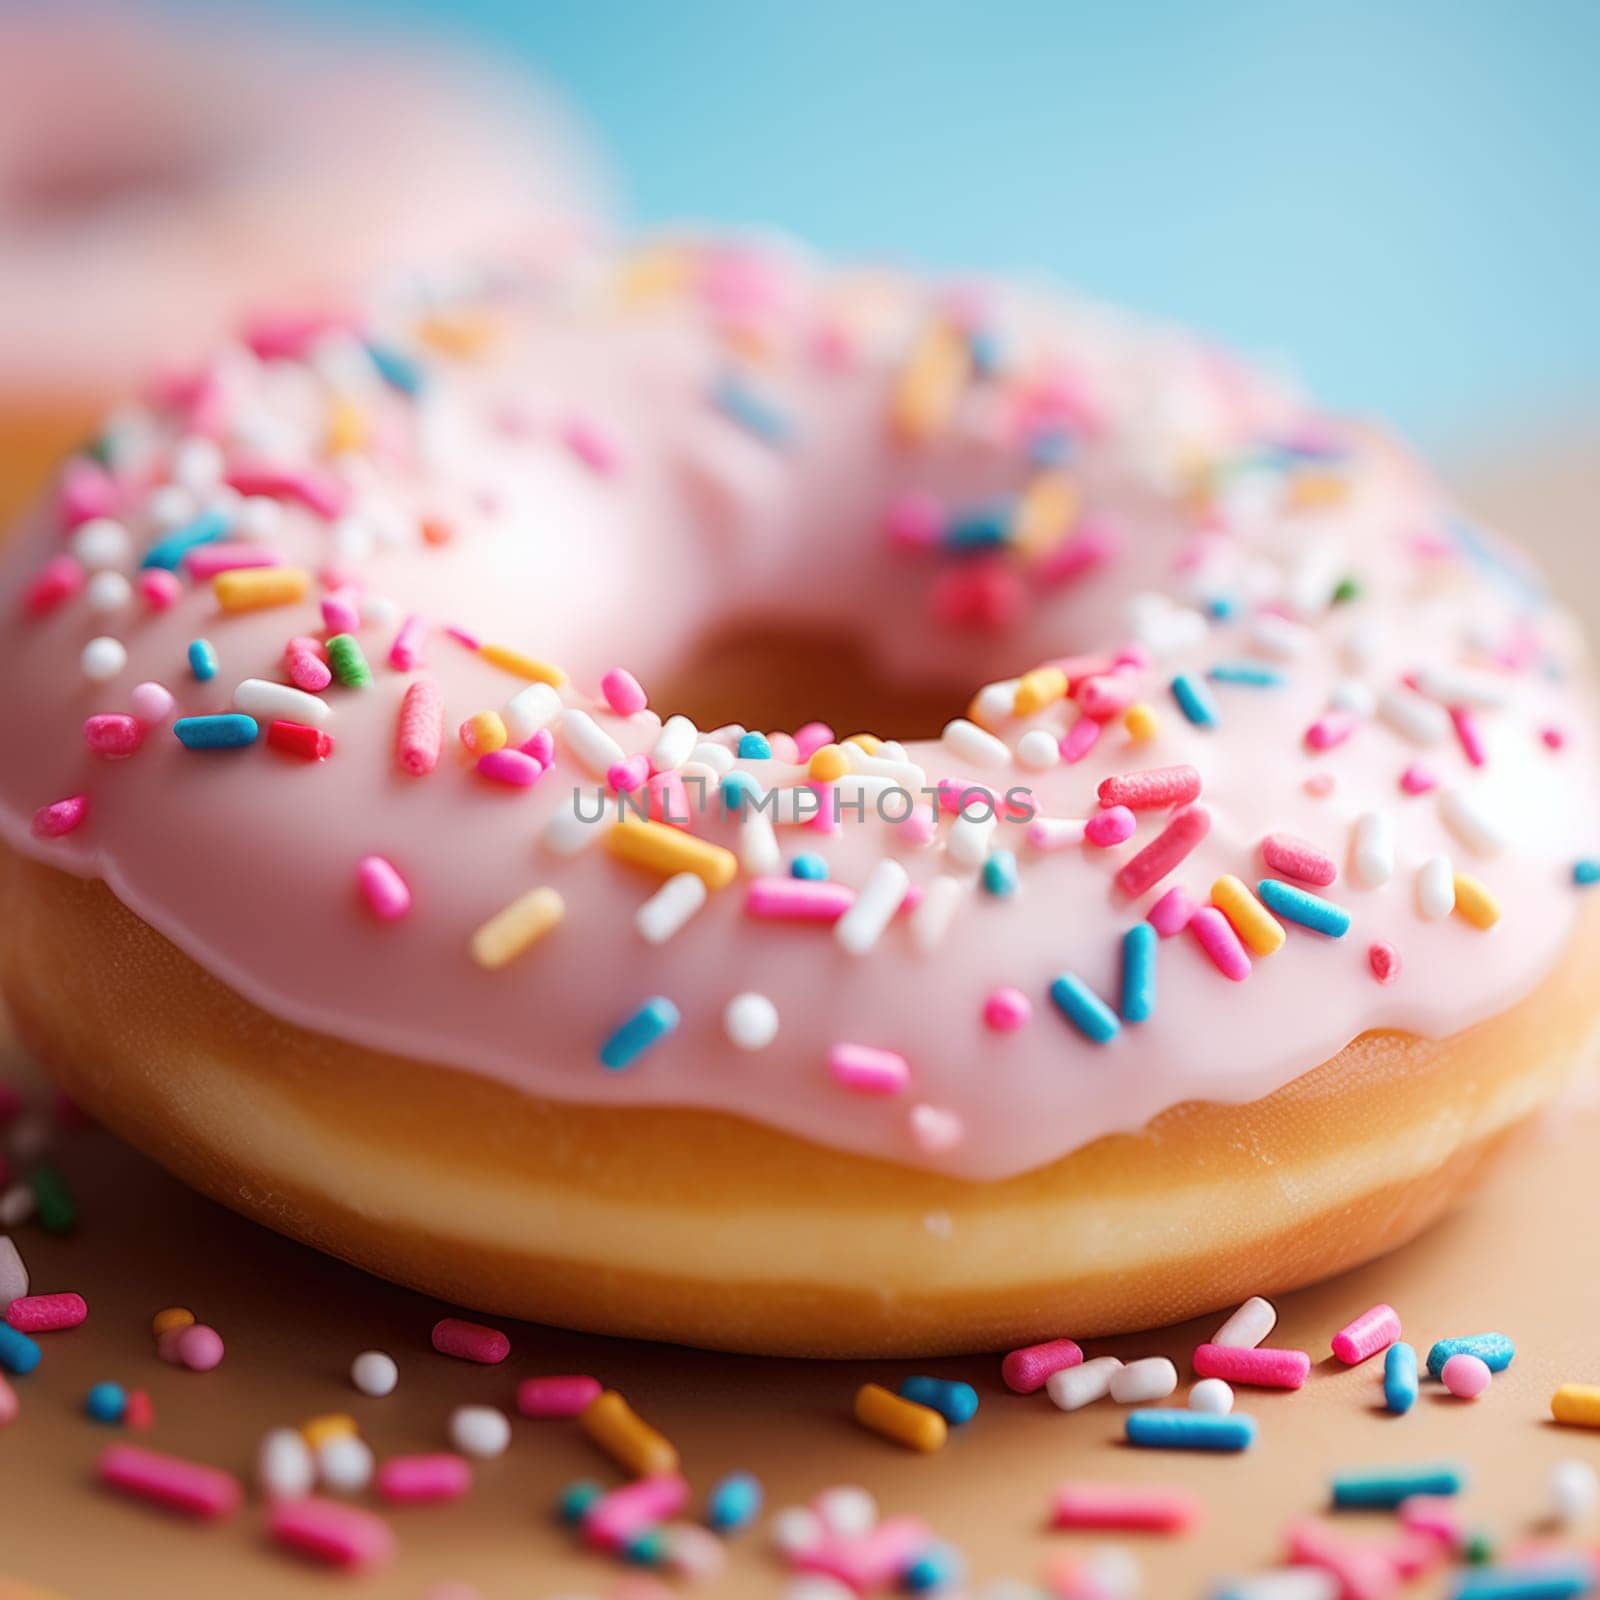 A close up of two donuts with pink frosting and sprinkles, AI by starush